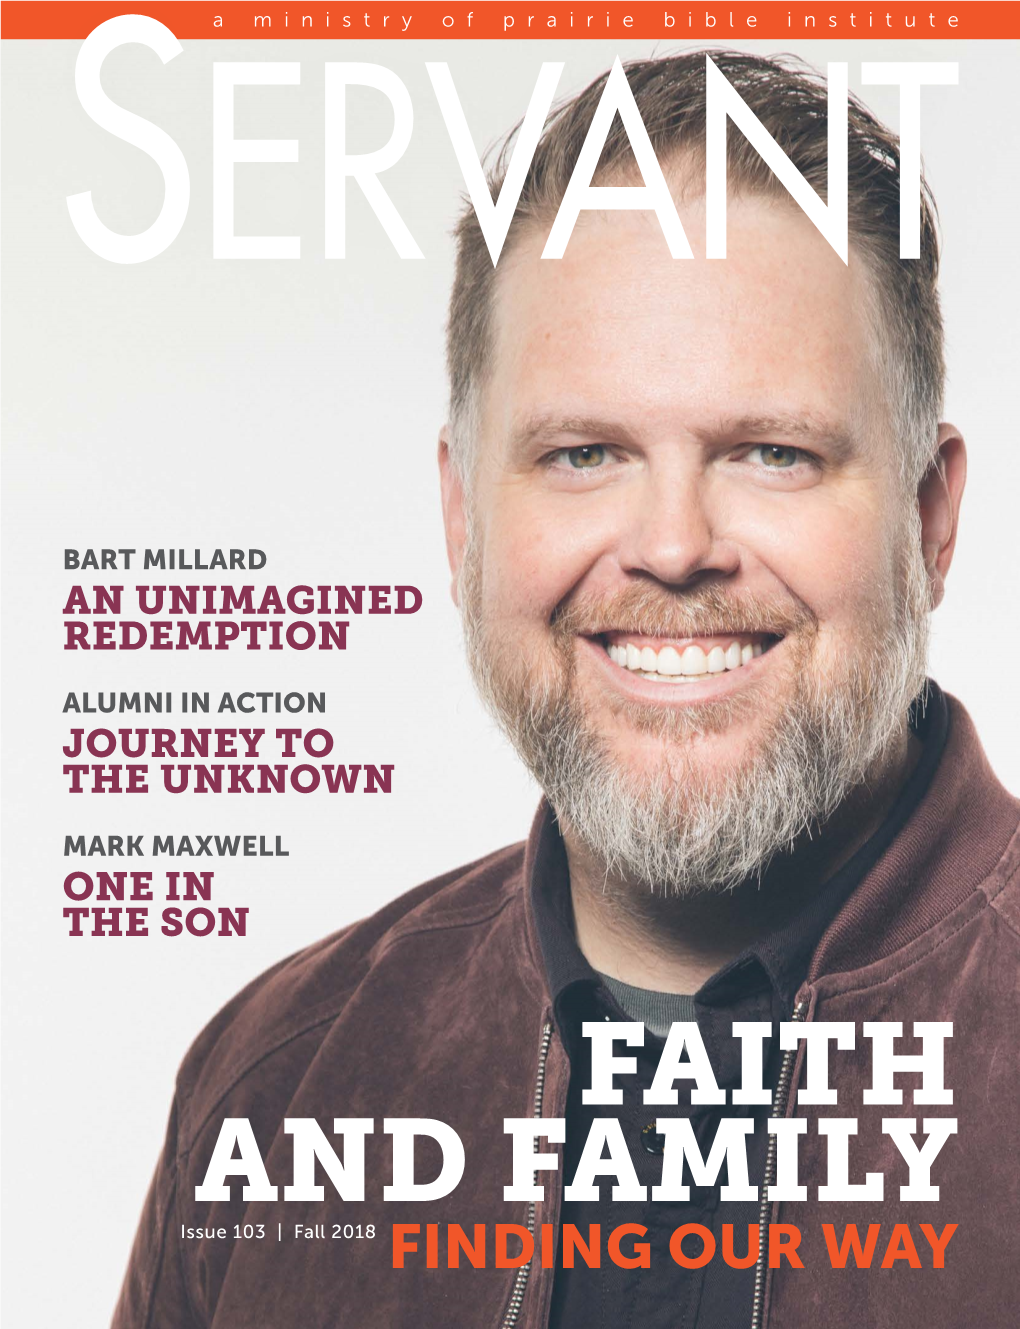 FAITH and FAMILY Issue 103 | Fall 2018 FINDING OUR WAY Servant Fall 2018 01 OFF the TOP MARK MAXWELL